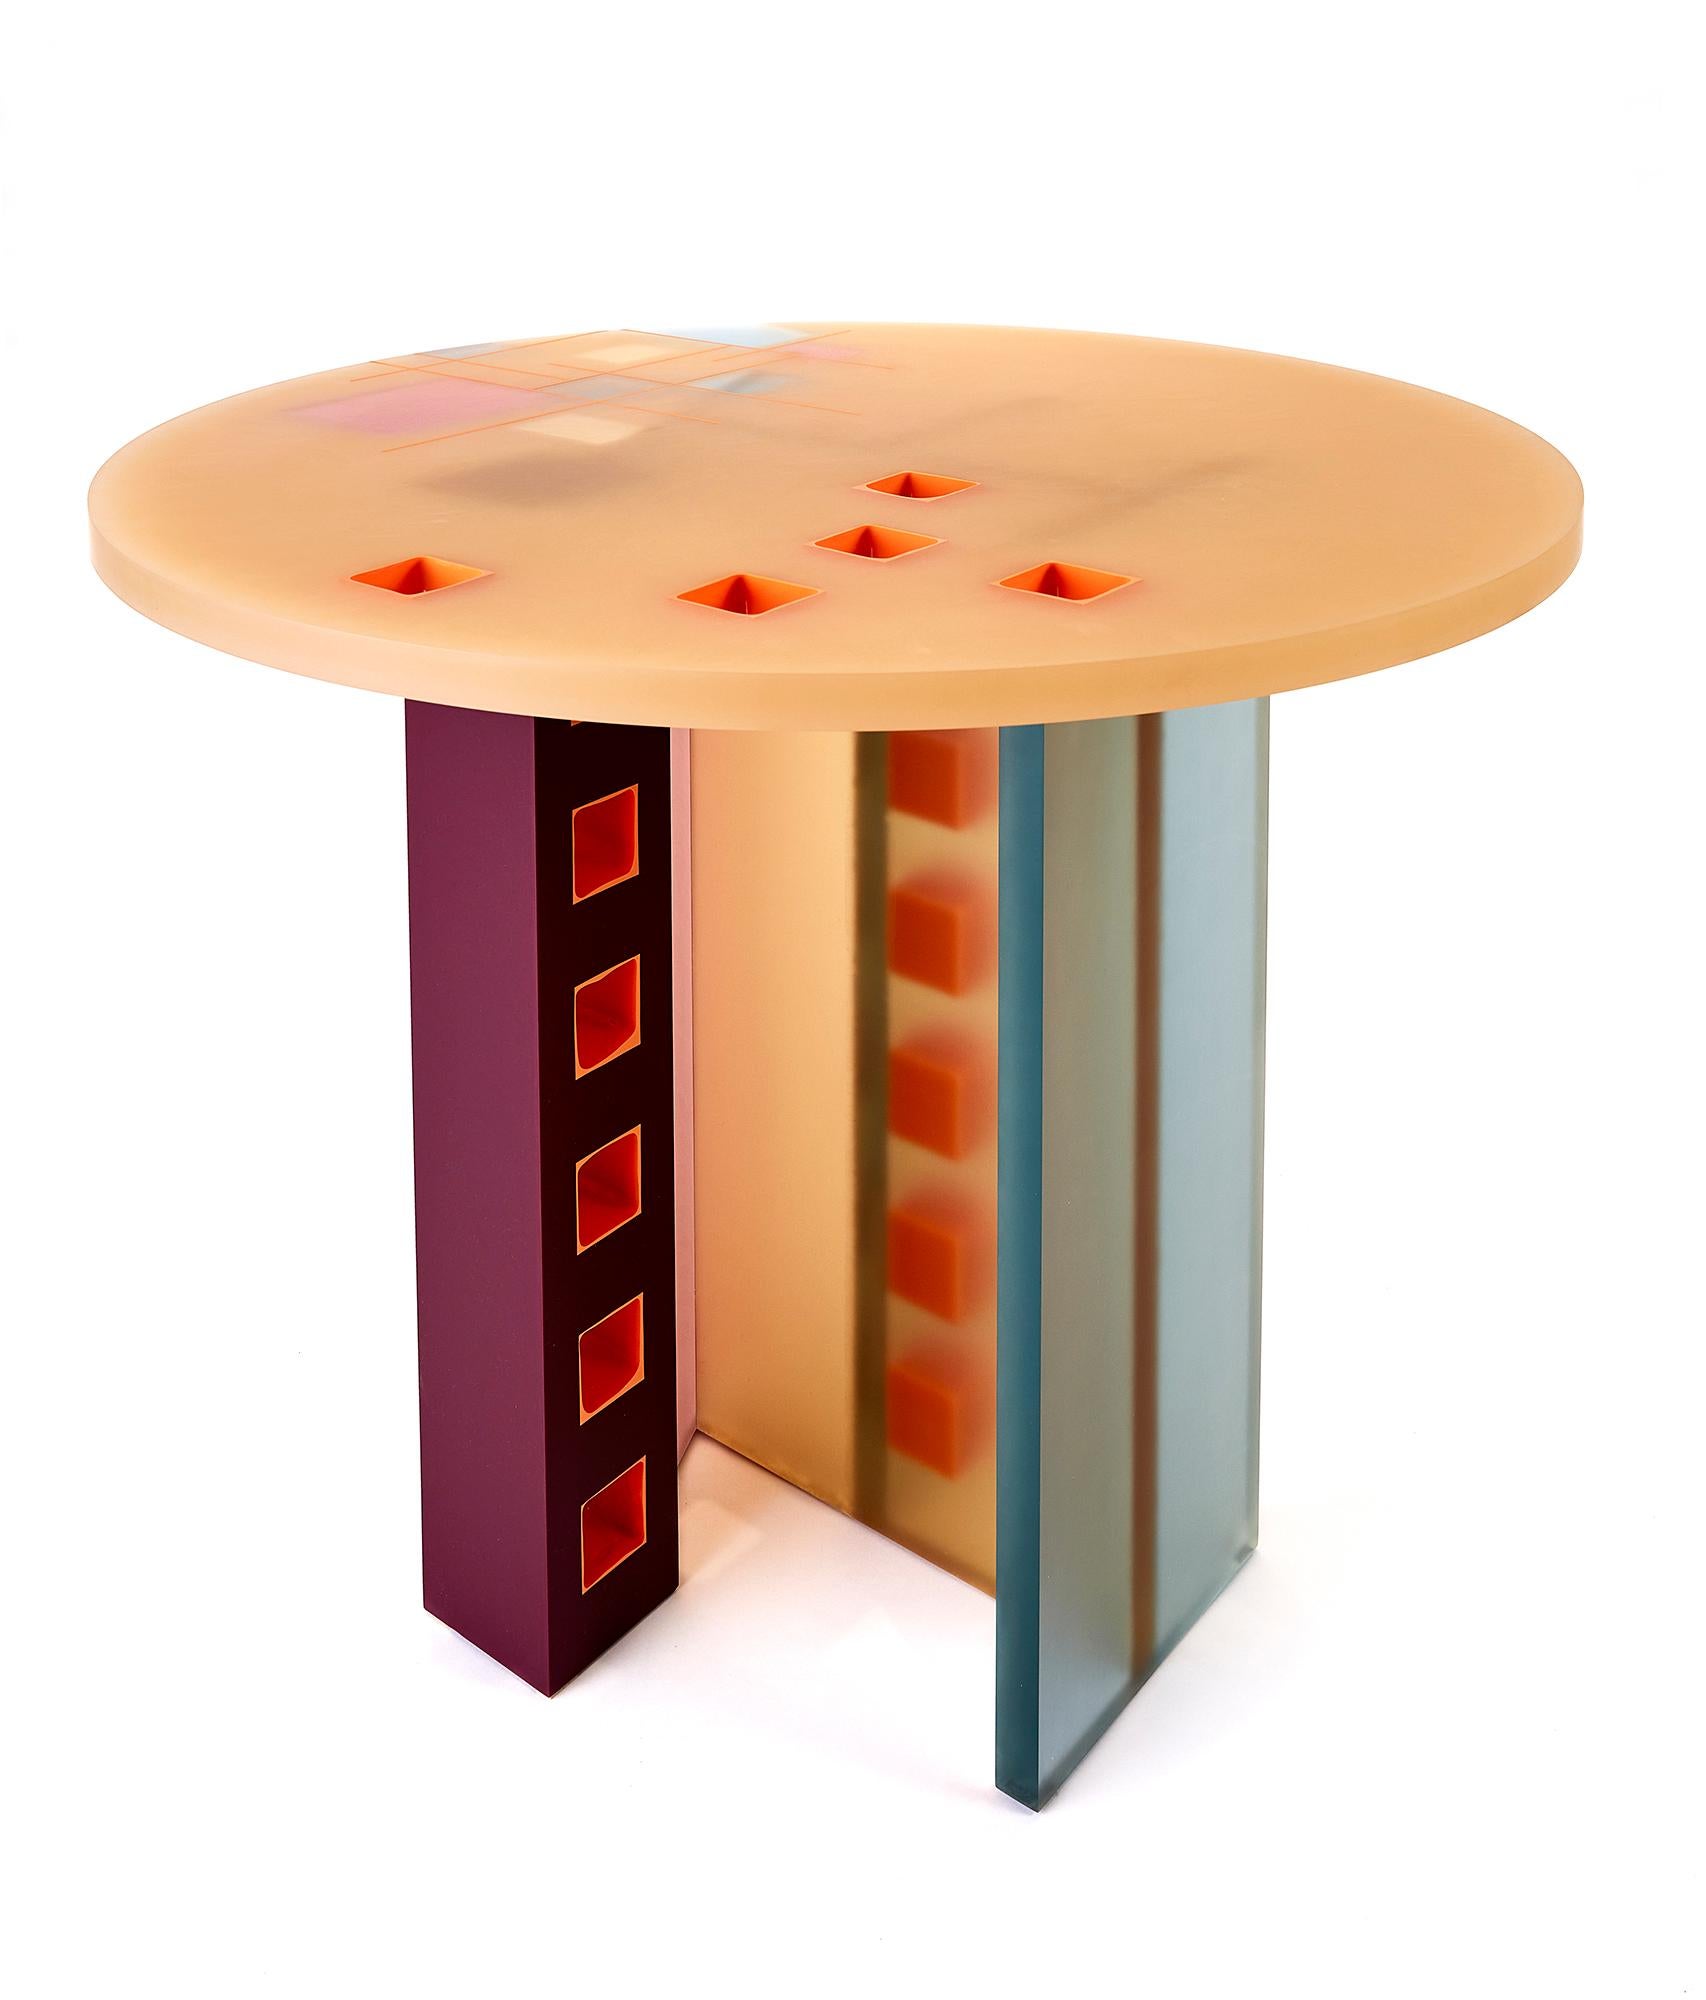 Our California Table is a one of a kind piece of resin furniture that is inspired by the intersection of natural and human-made beauty of the California landscape. Created with a mixture of translucent and opaque resin, the table features a stunning